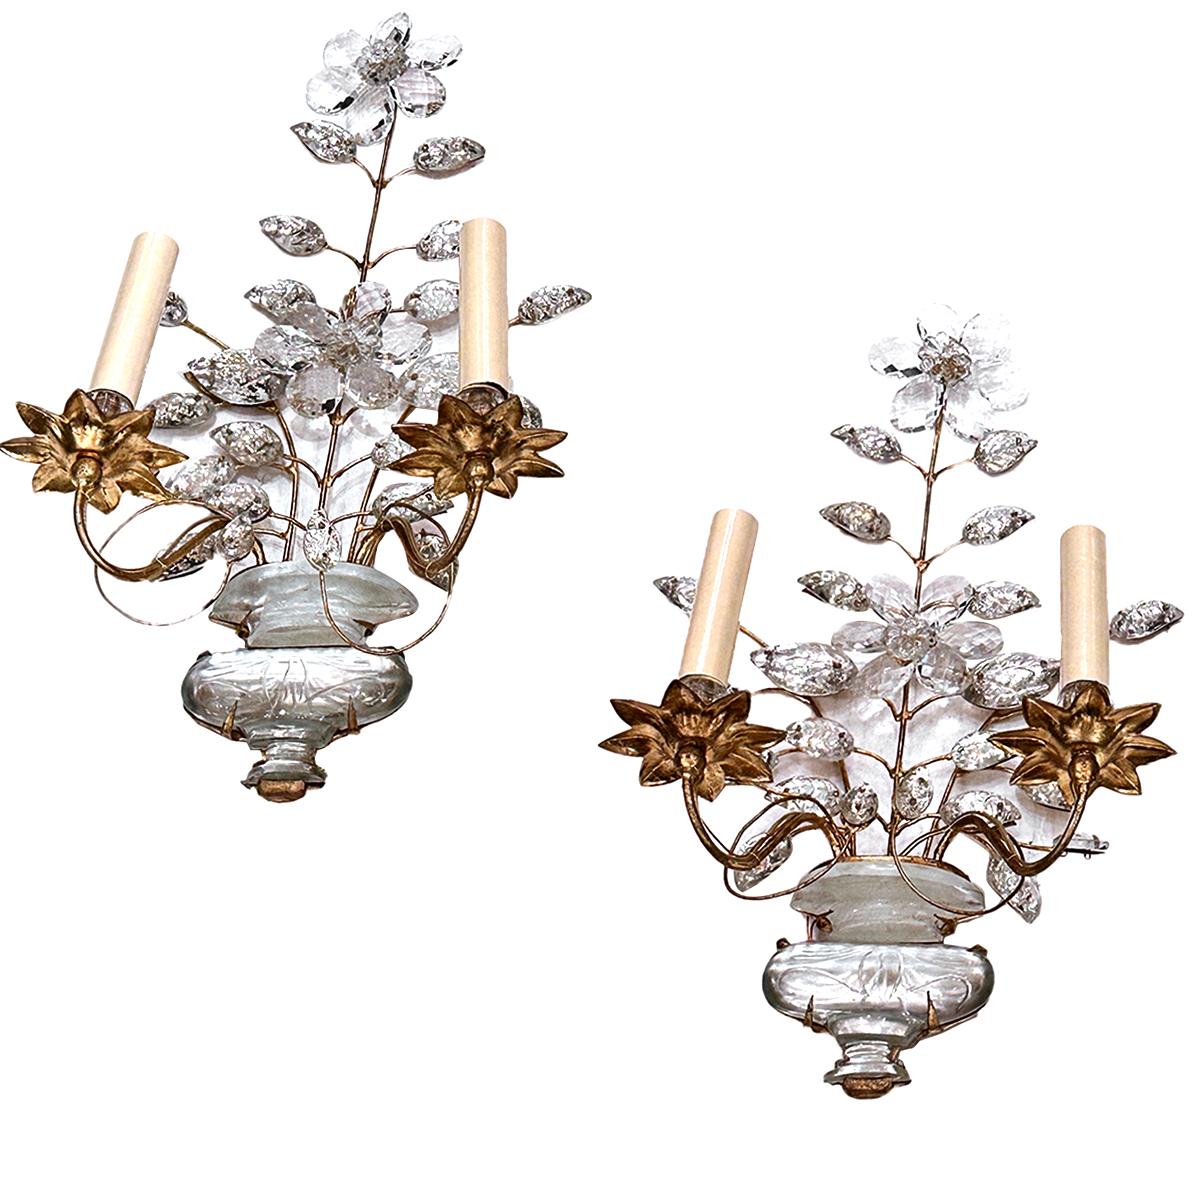 A set of circa 1940's French two-arm gilt metal sconces with molded glass leaves and flowers. Sold per pair.

Measurements:
Height: 18